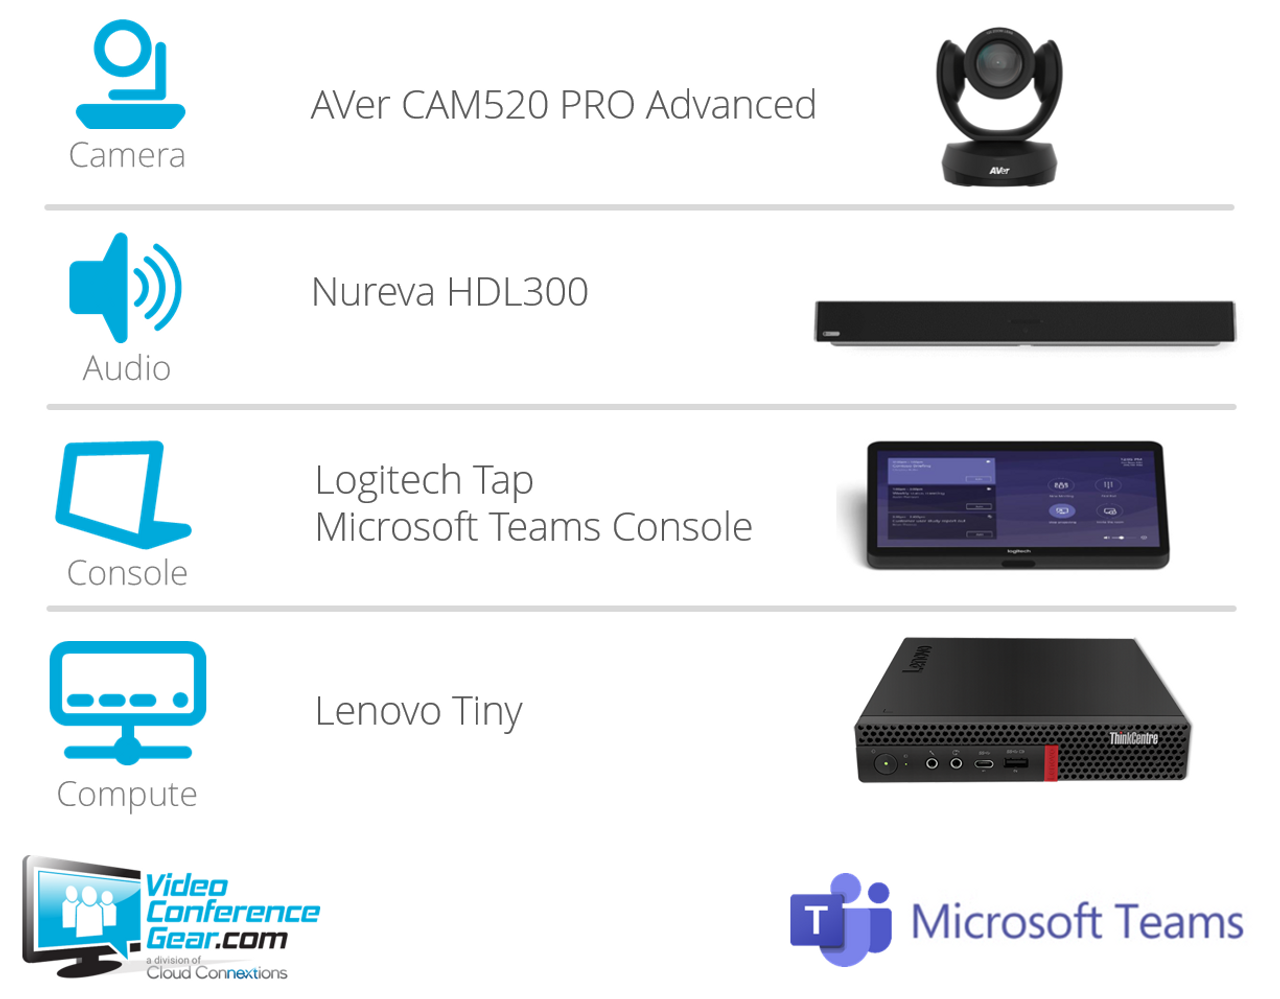 Microsoft Teams Kit featuring the AVer CAM520 Pro2 and Nureva HDL300 with the Lenovo Tiny Designed for Any Conference Room